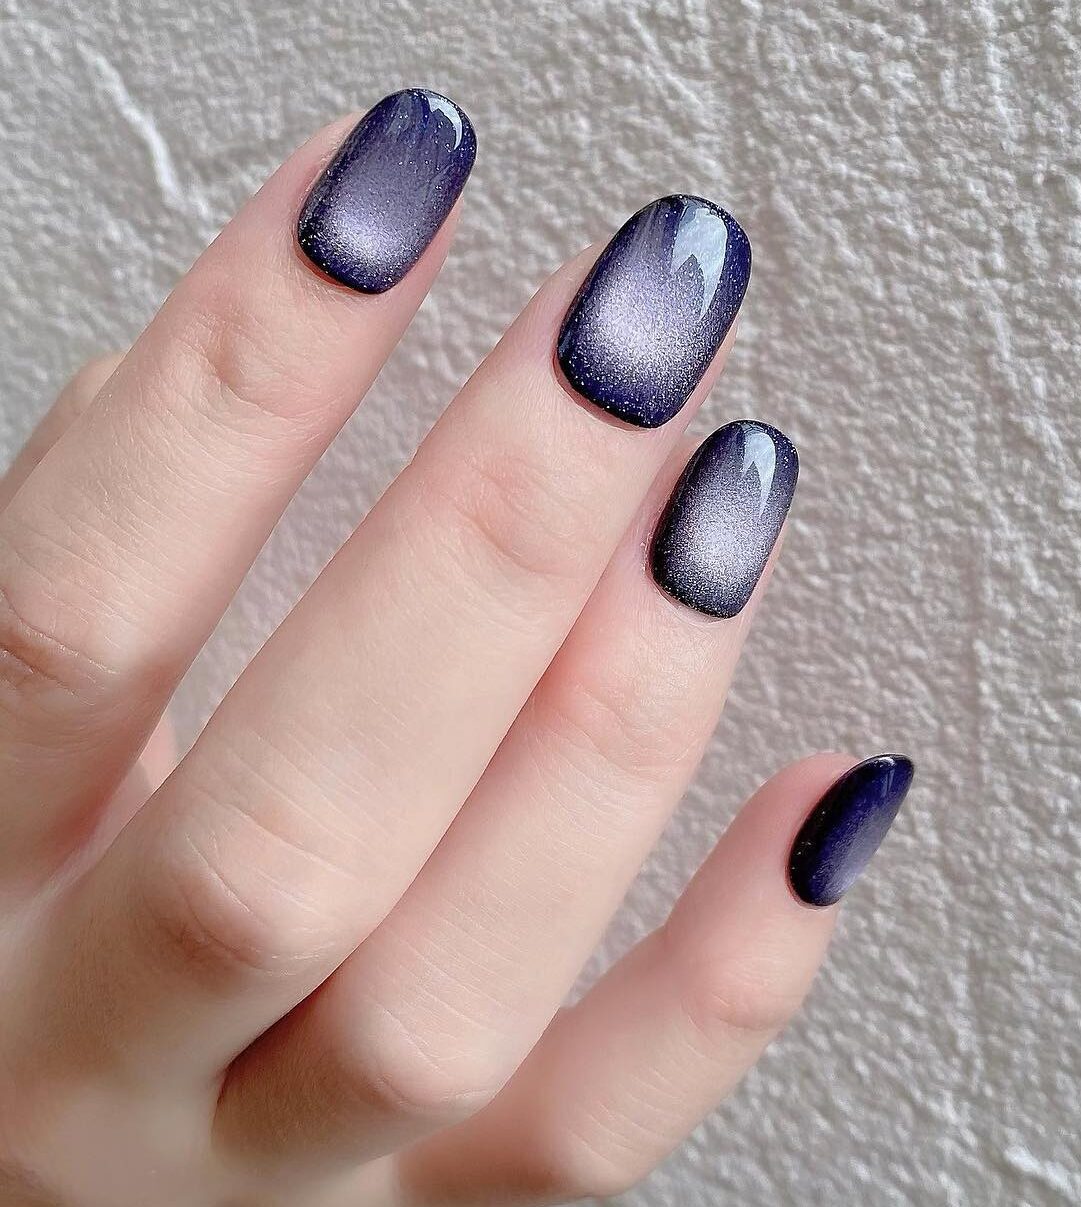 Holographic blue galaxy-inspired nail art on short round nails